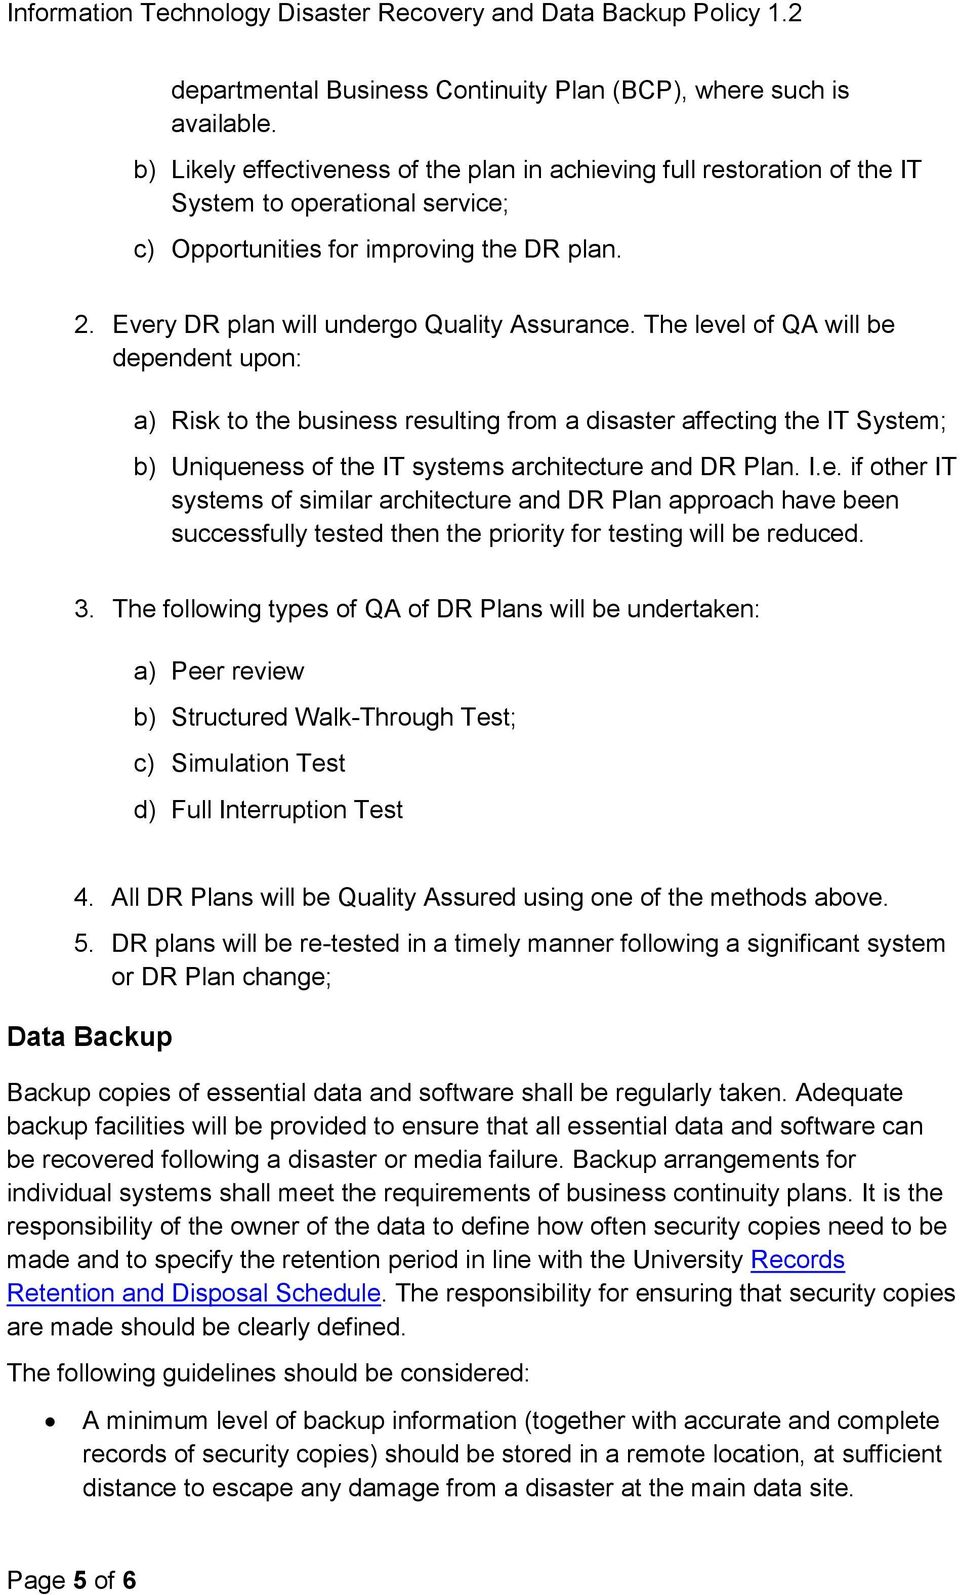 The level of QA will be dependent upon: a) Risk to the business resulting from a disaster affecting the IT System; b) Uniqueness of the IT systems architecture and DR Plan. I.e. if other IT systems of similar architecture and DR Plan approach have been successfully tested then the priority for testing will be reduced.